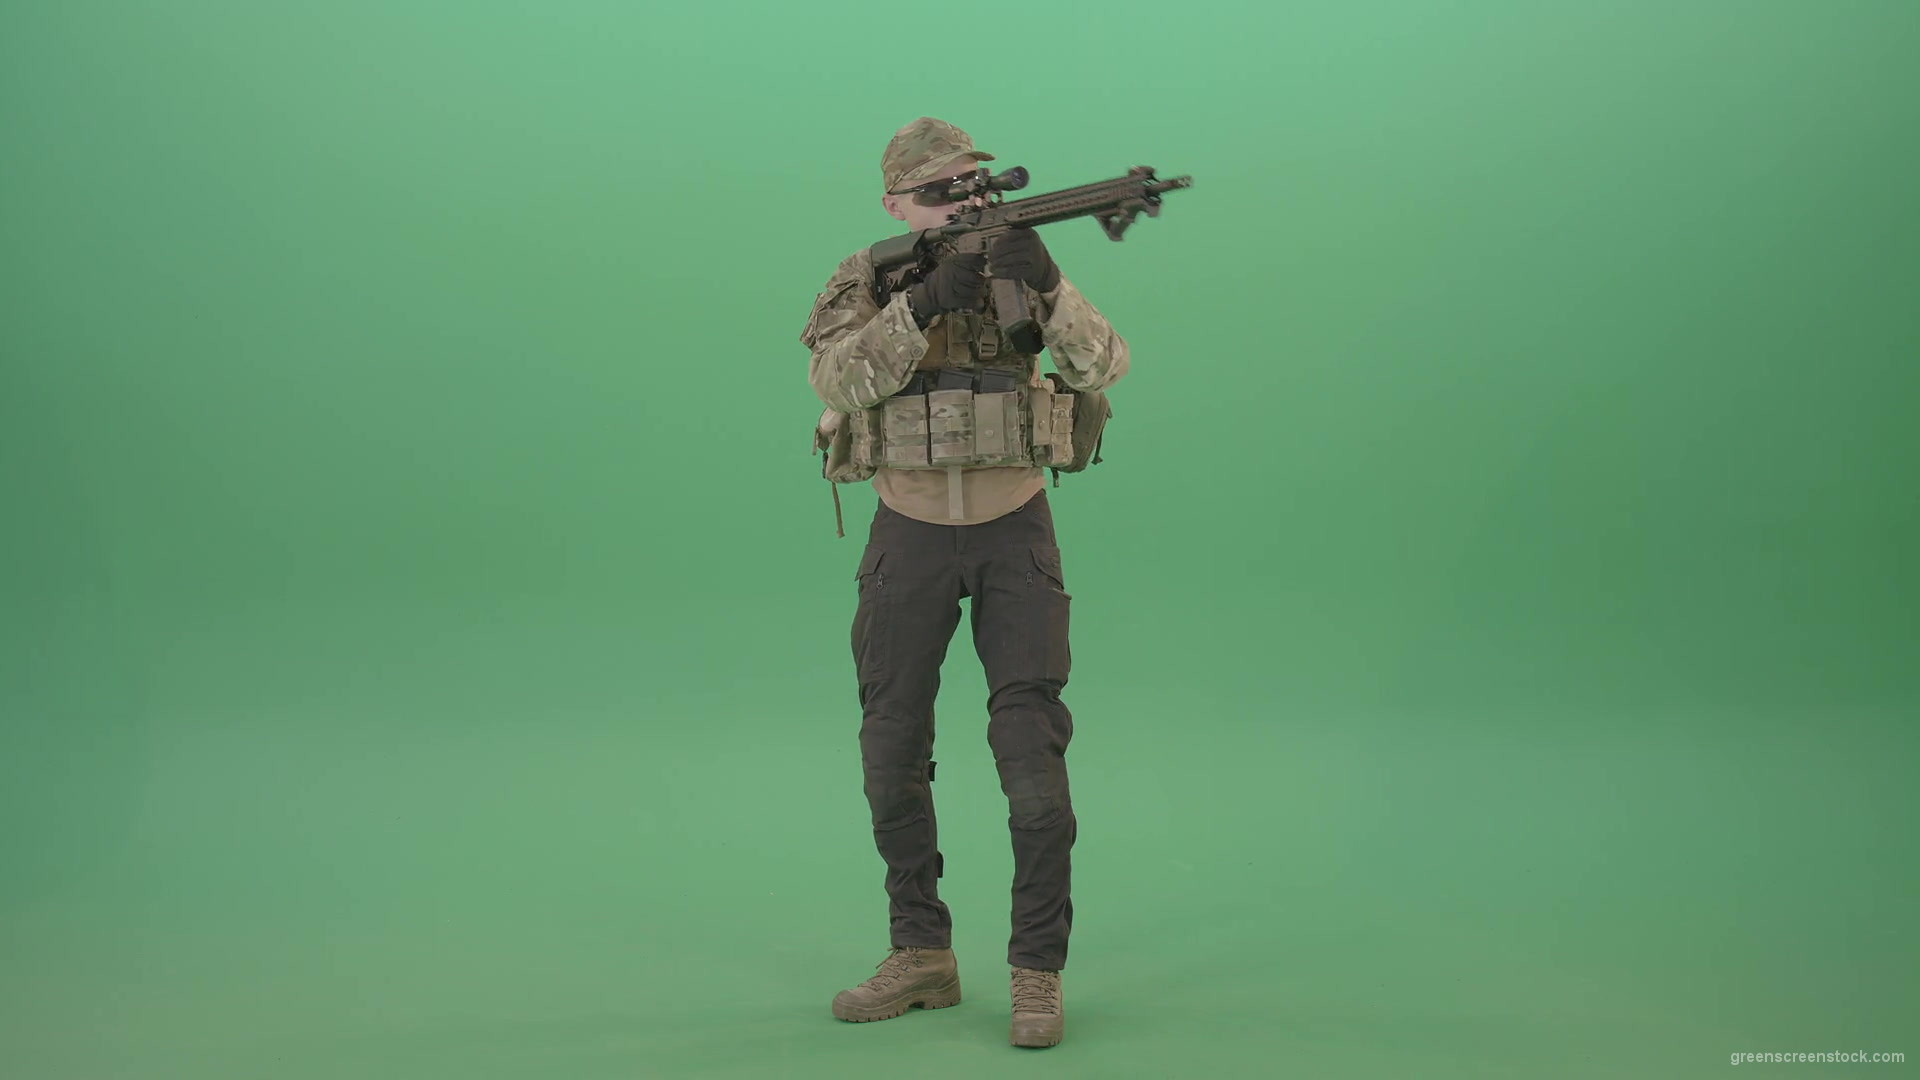 Counter-strike-army-police-man-shooting-enemy-from-machine-gun-in-Camouflage-uniform-on-green-screen-4K-Video-Footage-1920_007 Green Screen Stock